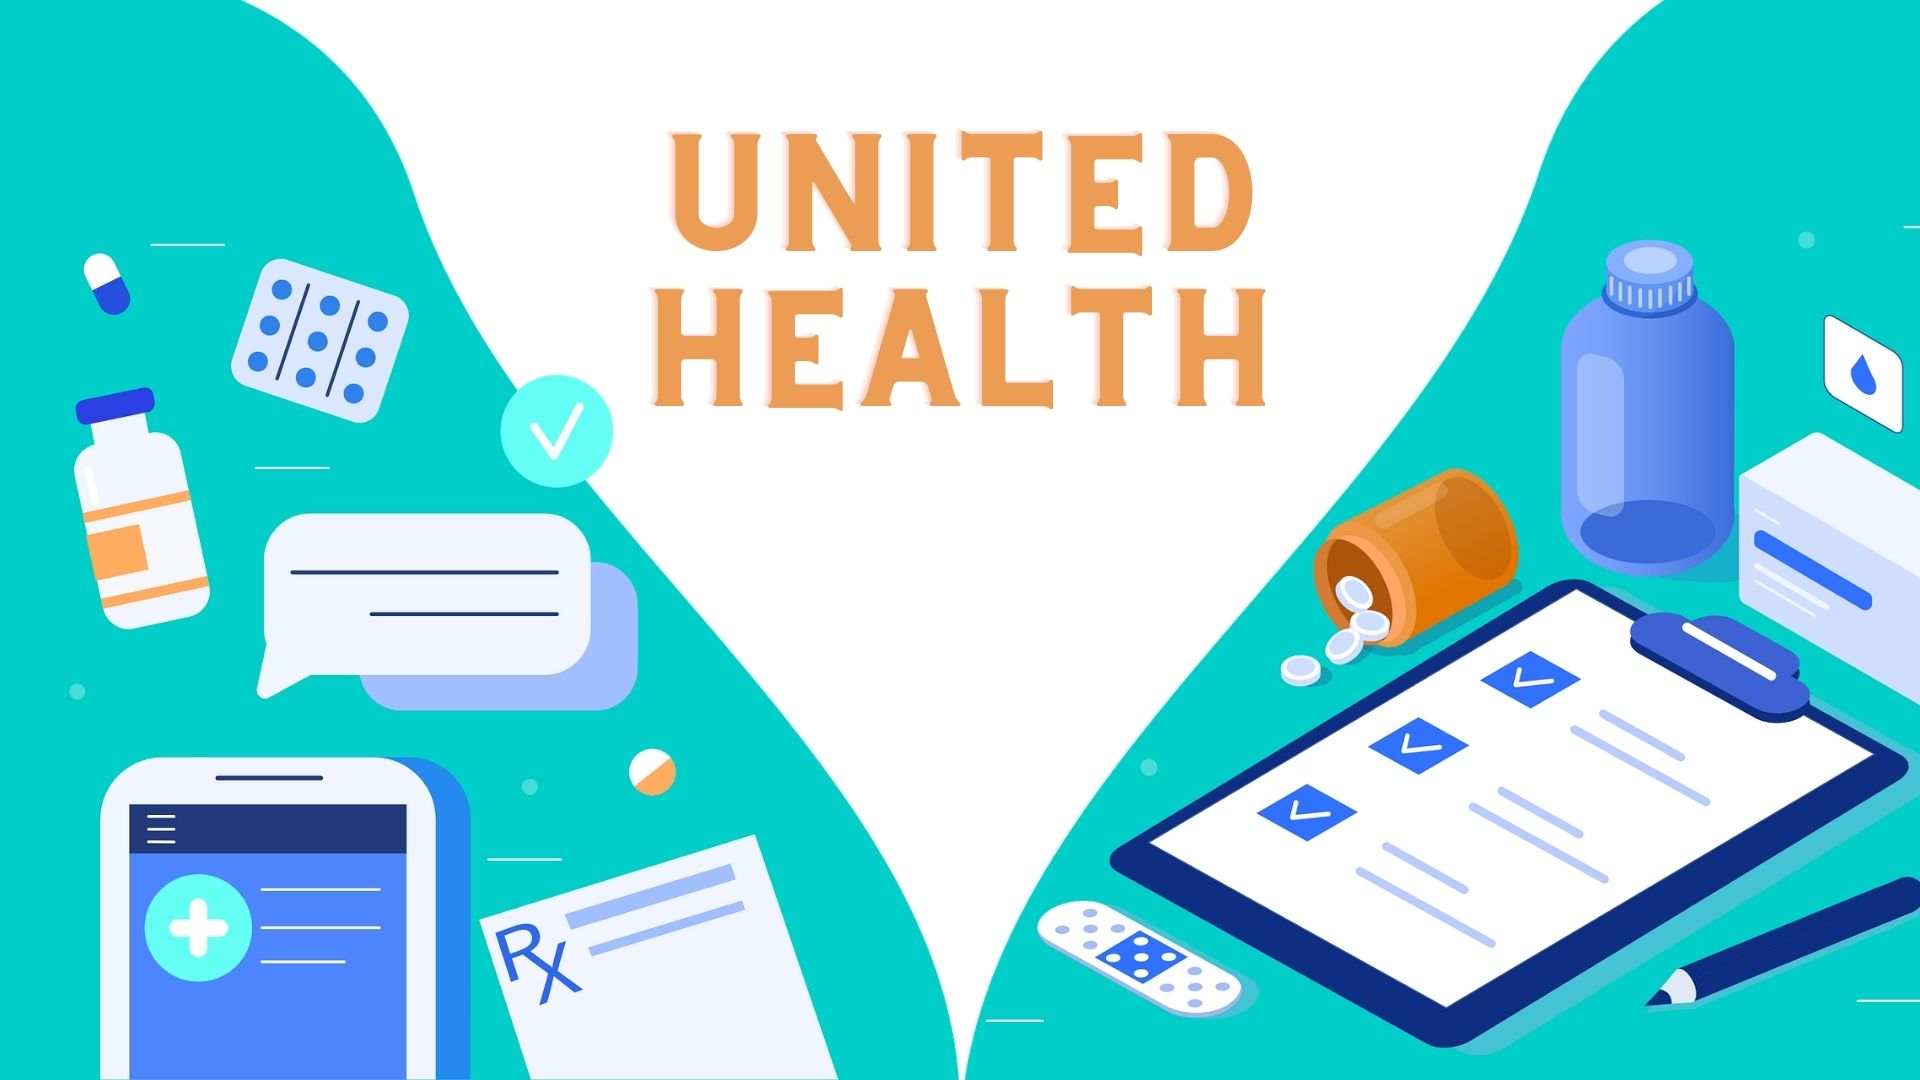 An Image showing United Health group